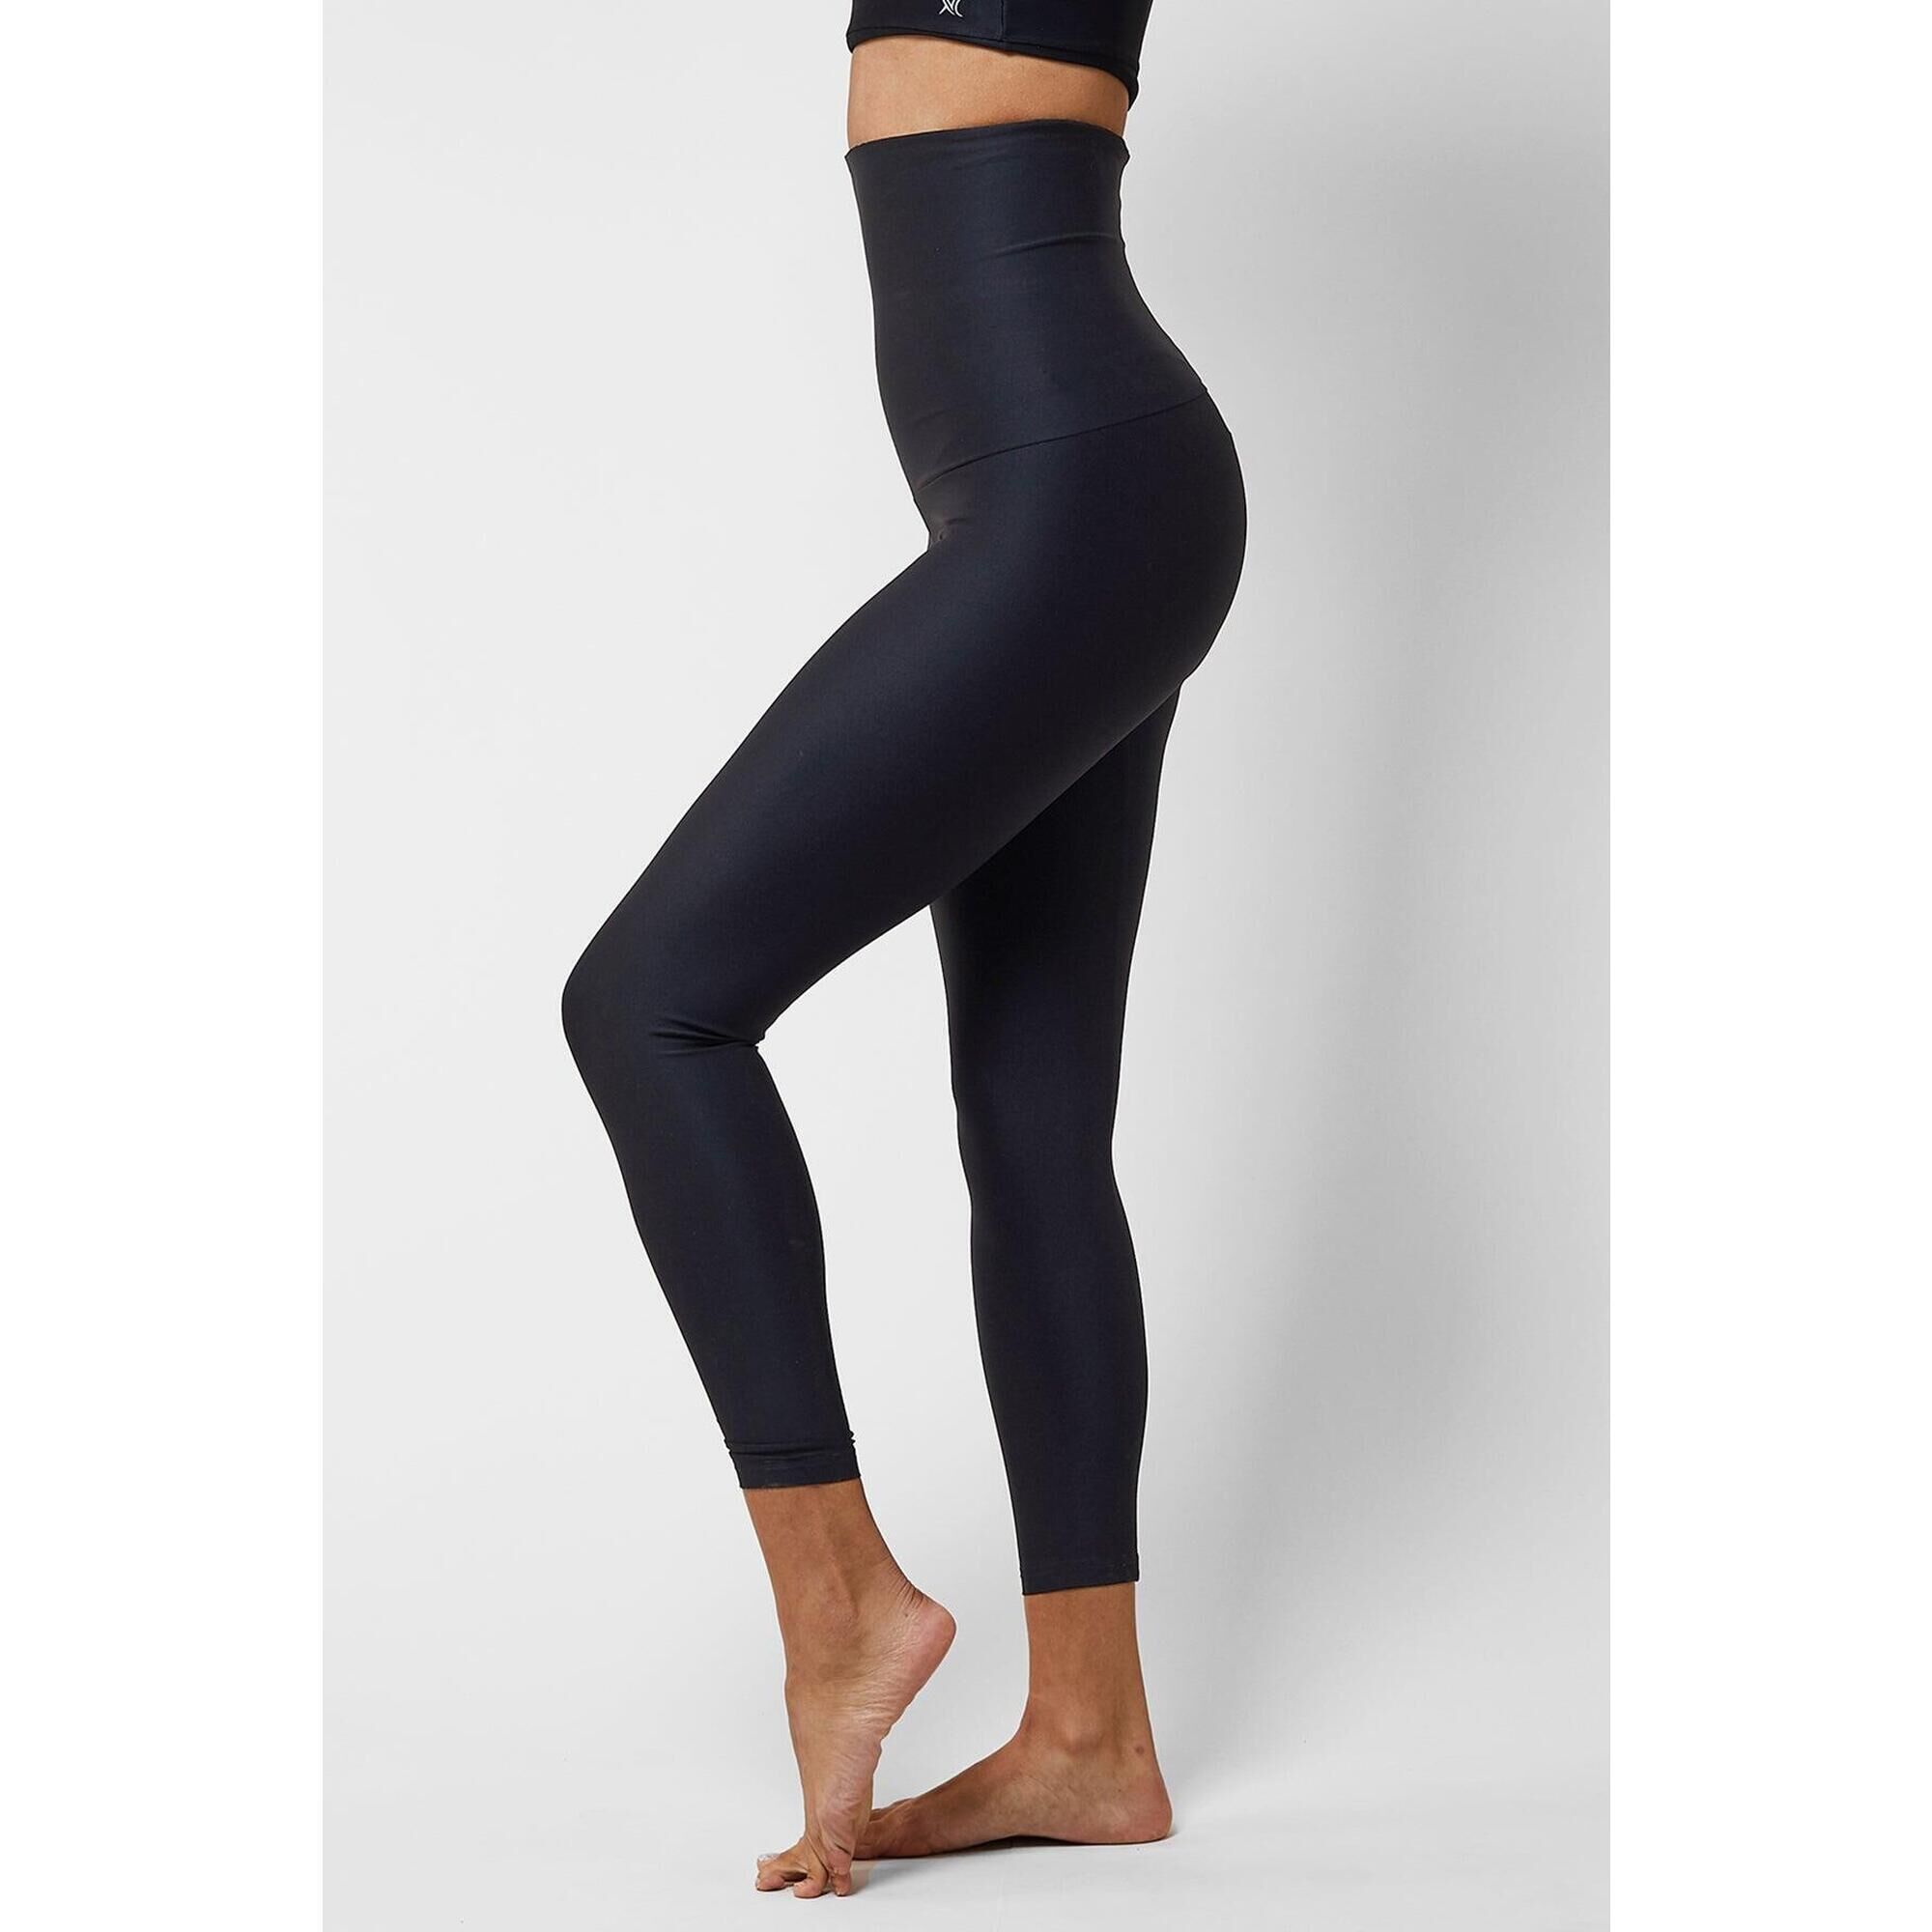 TLC Sport Performance Extra Strong Compression Figure Firming Legging -  Black